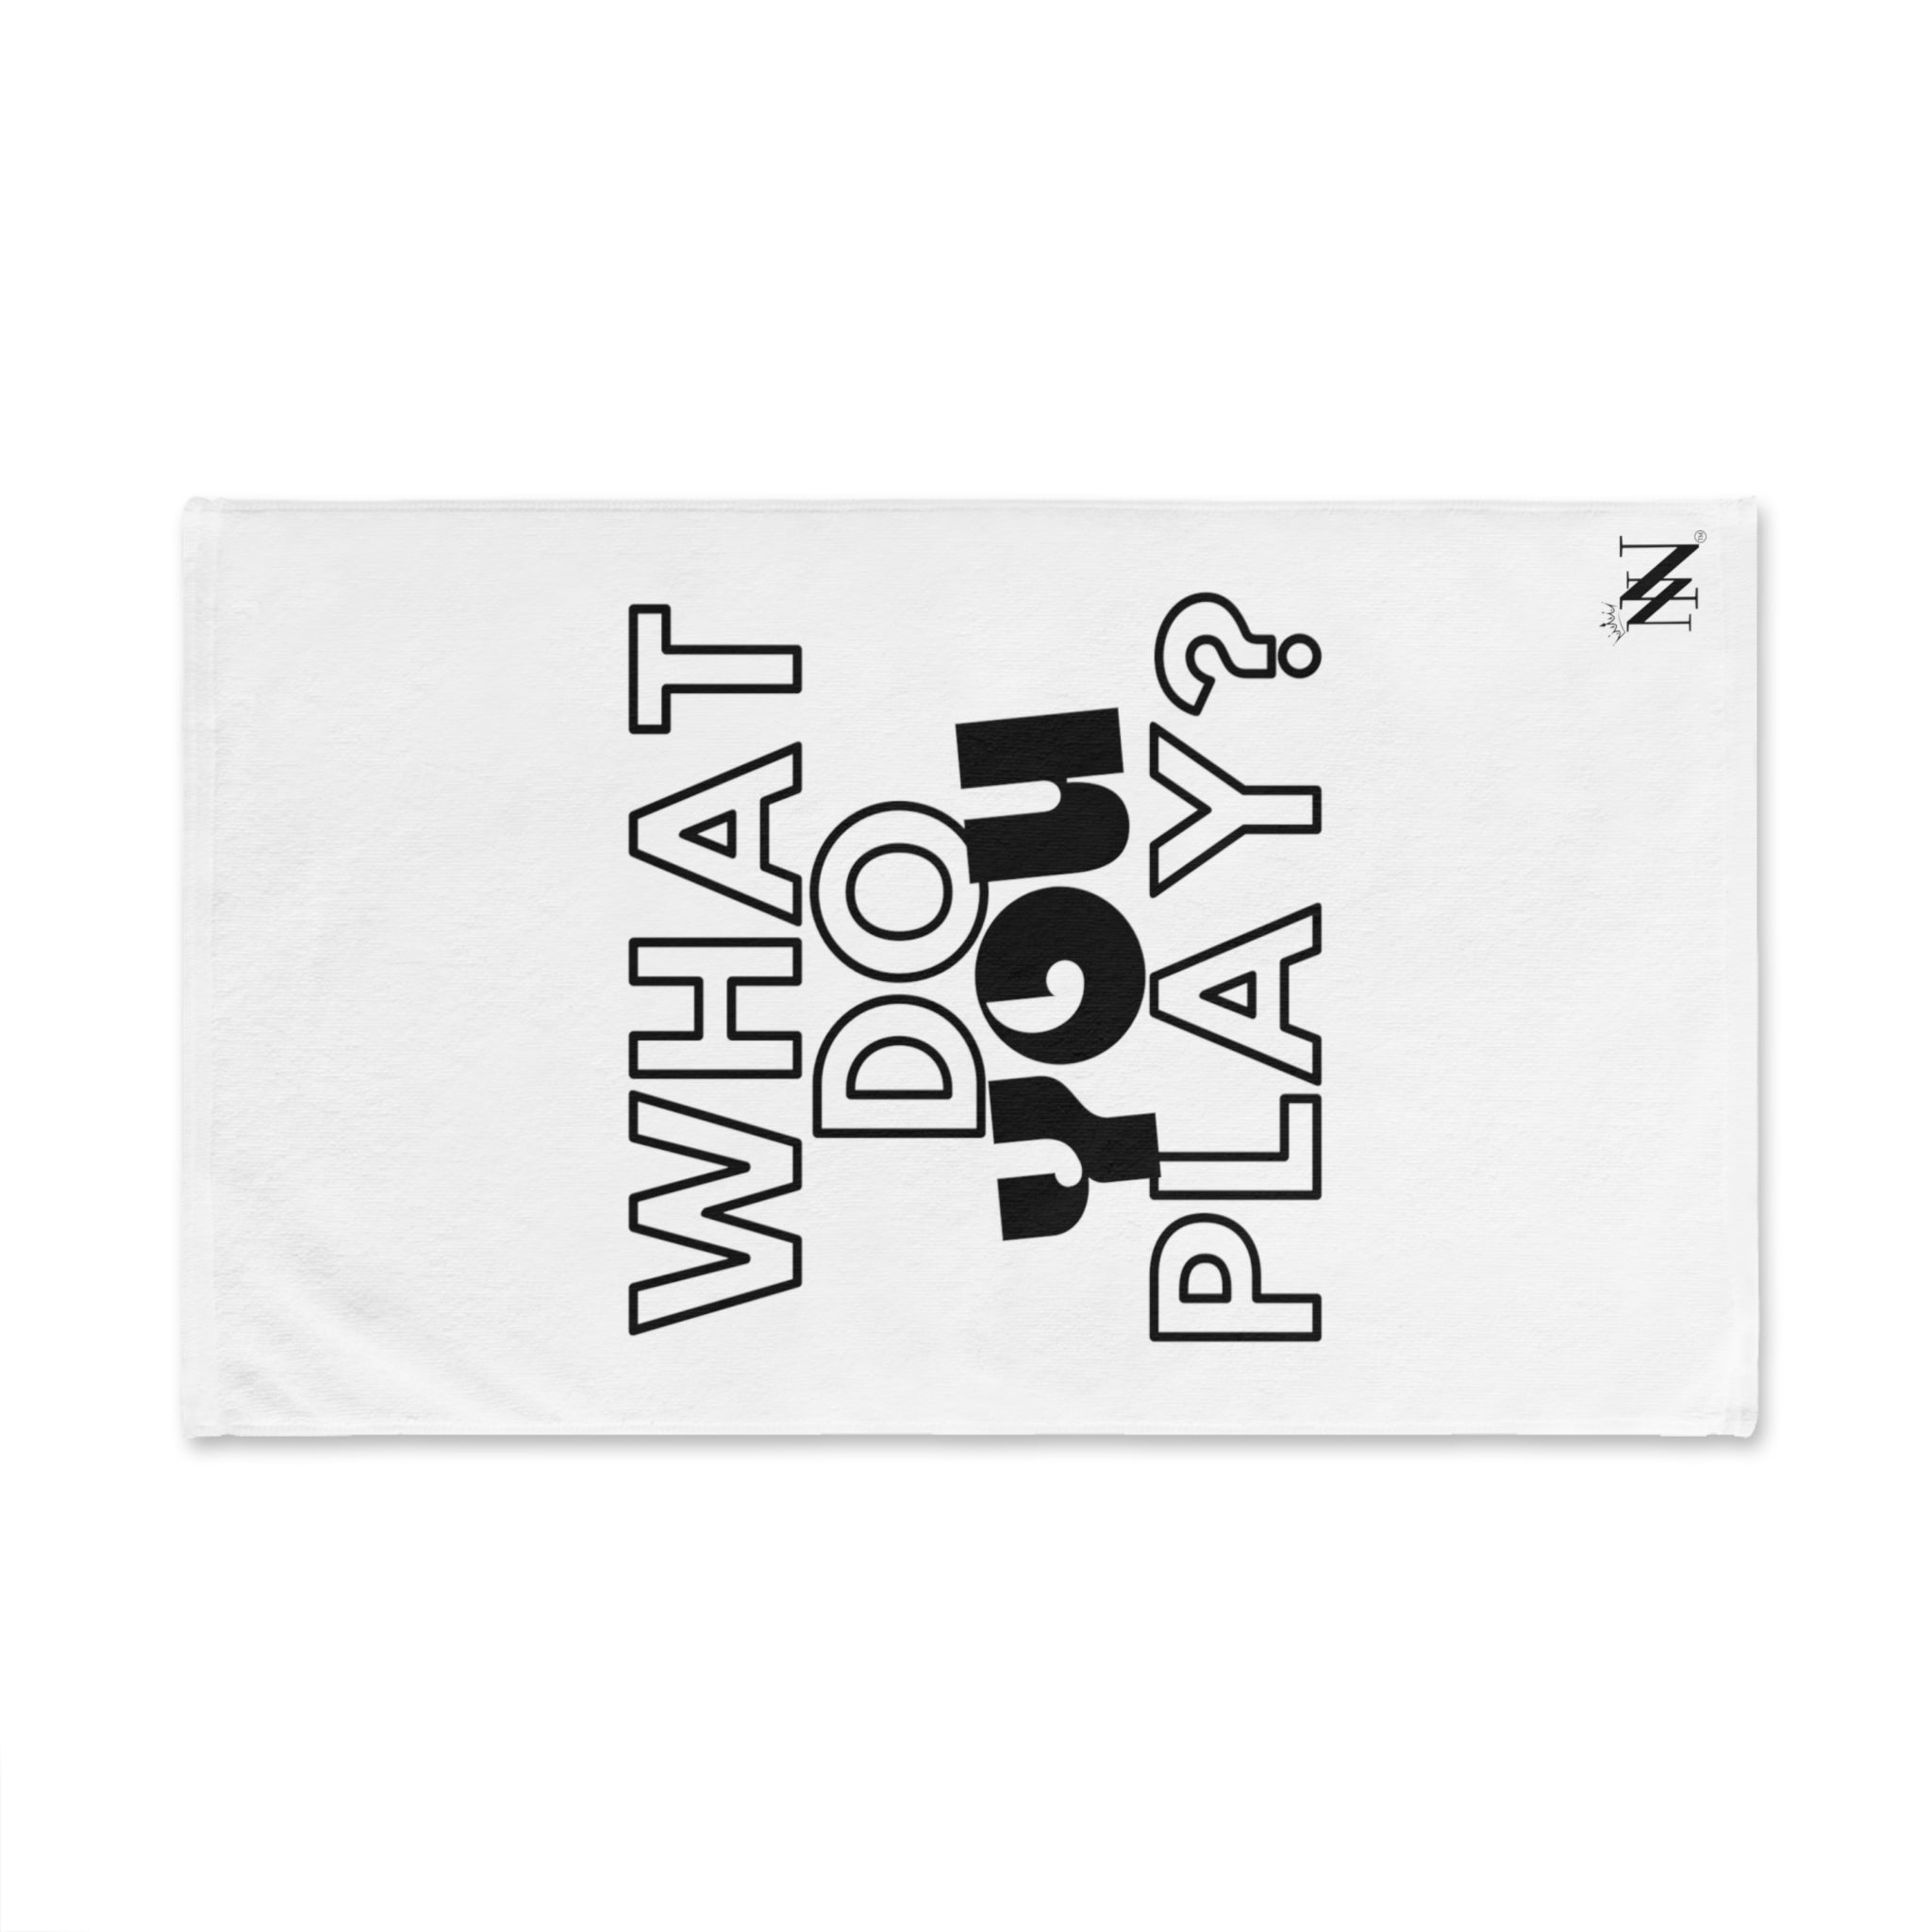 What You Play White | Funny Gifts for Men - Gifts for Him - Birthday Gifts for Men, Him, Her, Husband, Boyfriend, Girlfriend, New Couple Gifts, Fathers & Valentines Day Gifts, Christmas Gifts NECTAR NAPKINS